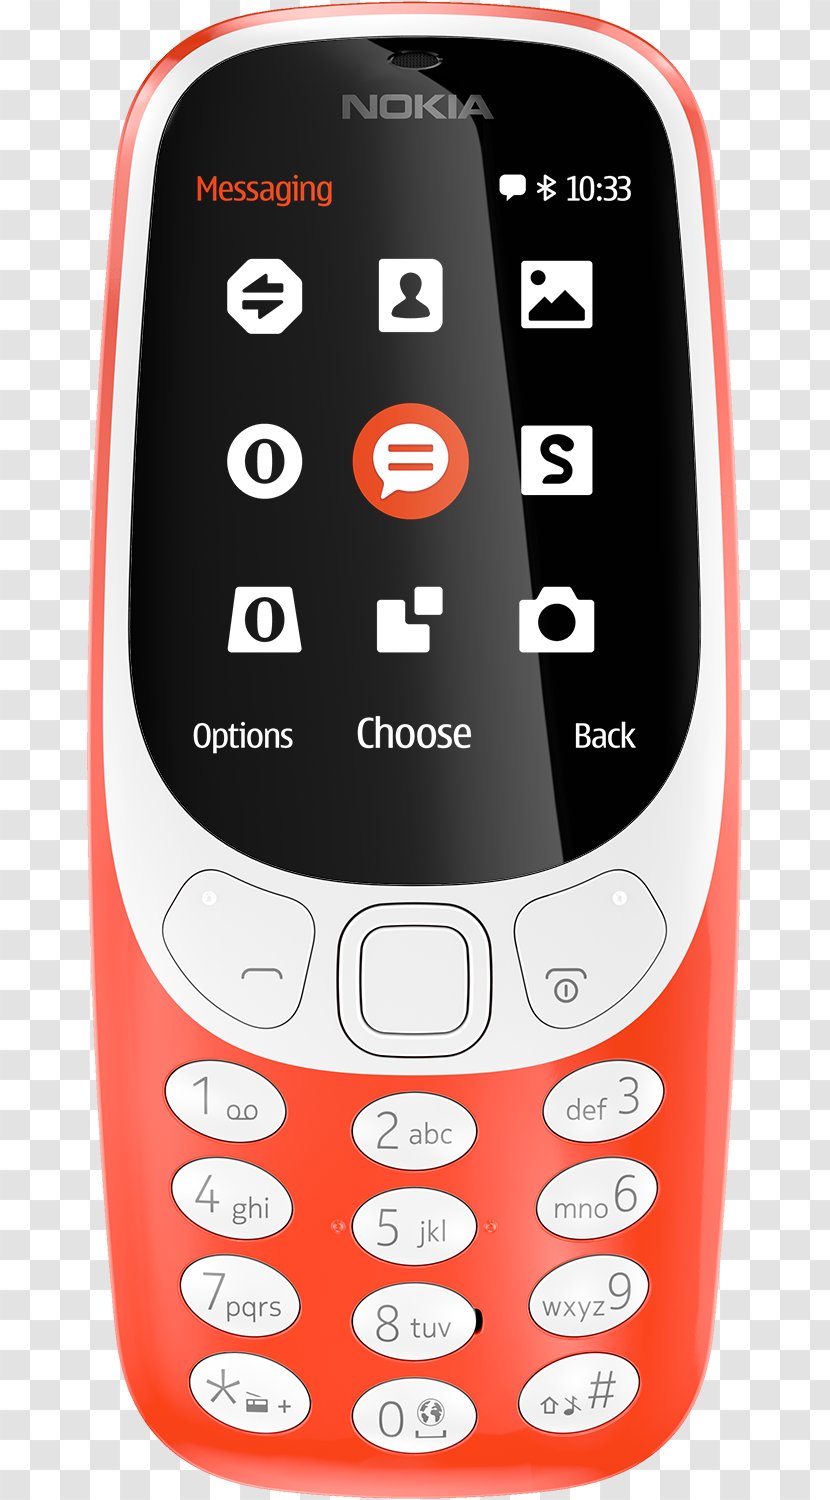 Nokia 3310 (2017) 6 - Technology - Mobile Phone Transparent PNG